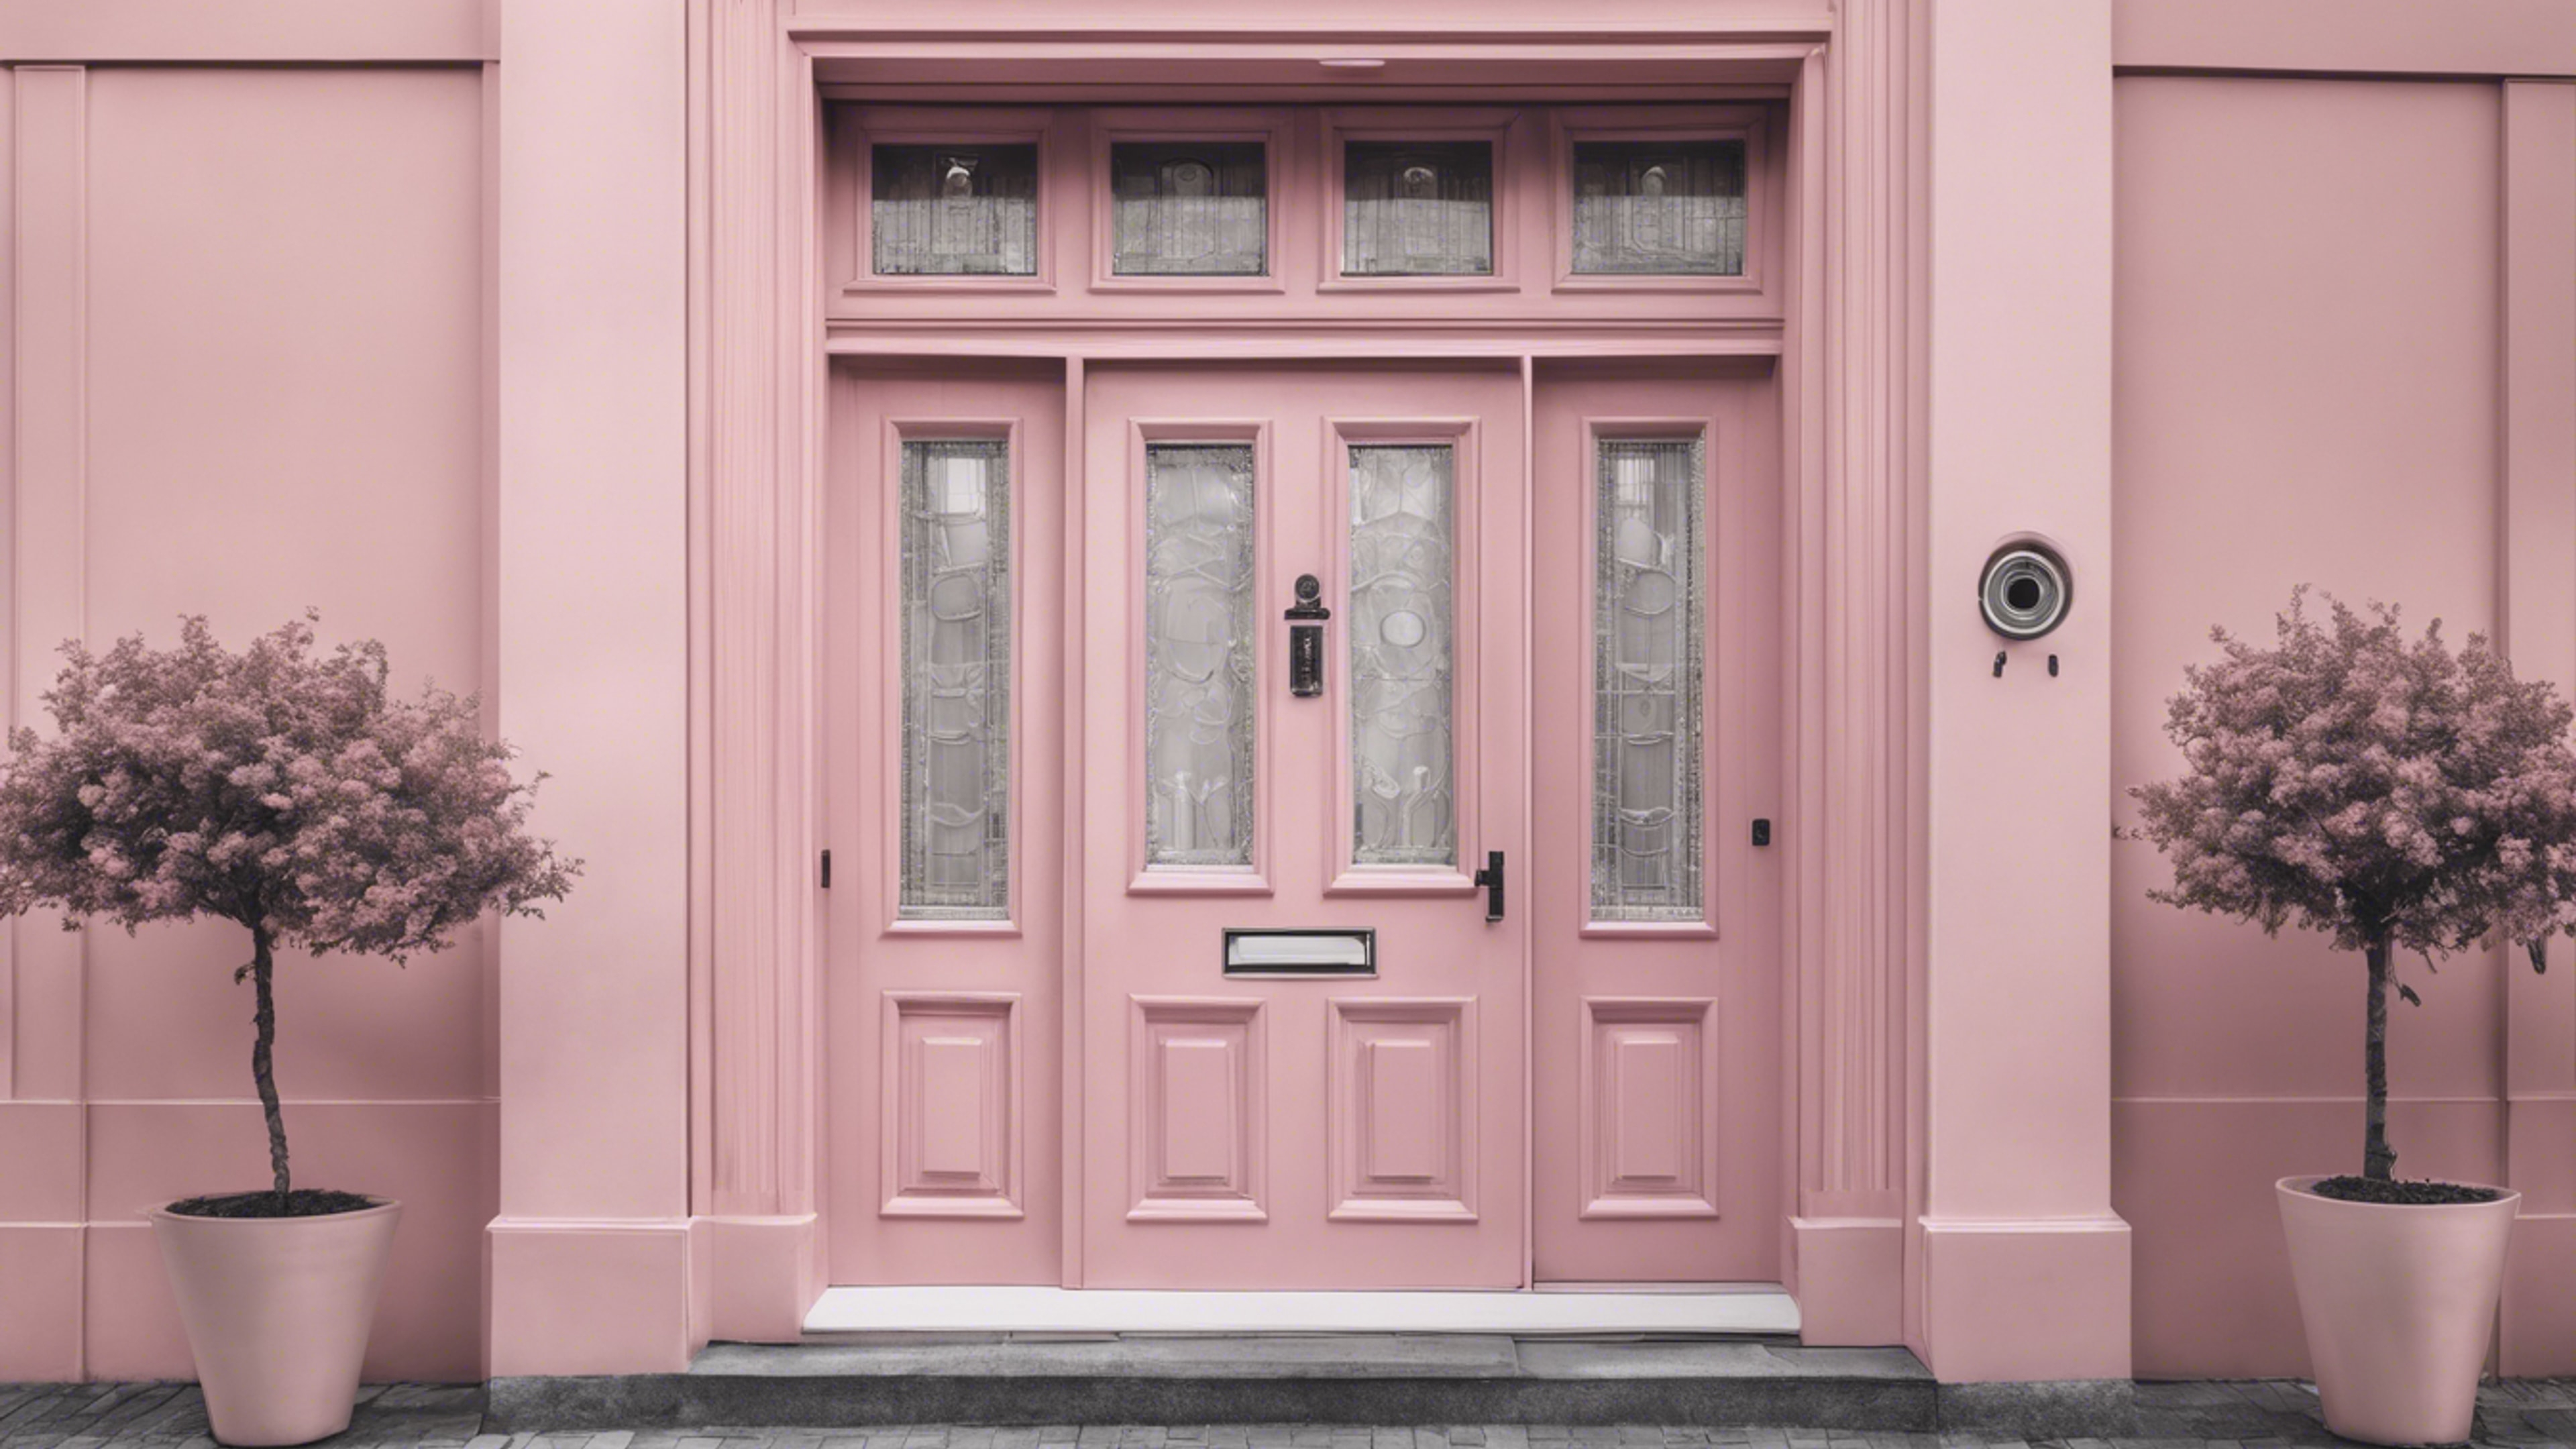 Monochrome image of a sophisticated townhouse door painted in a fetching preppy pastel pink. טפט[a9cdce63c1c94c029691]